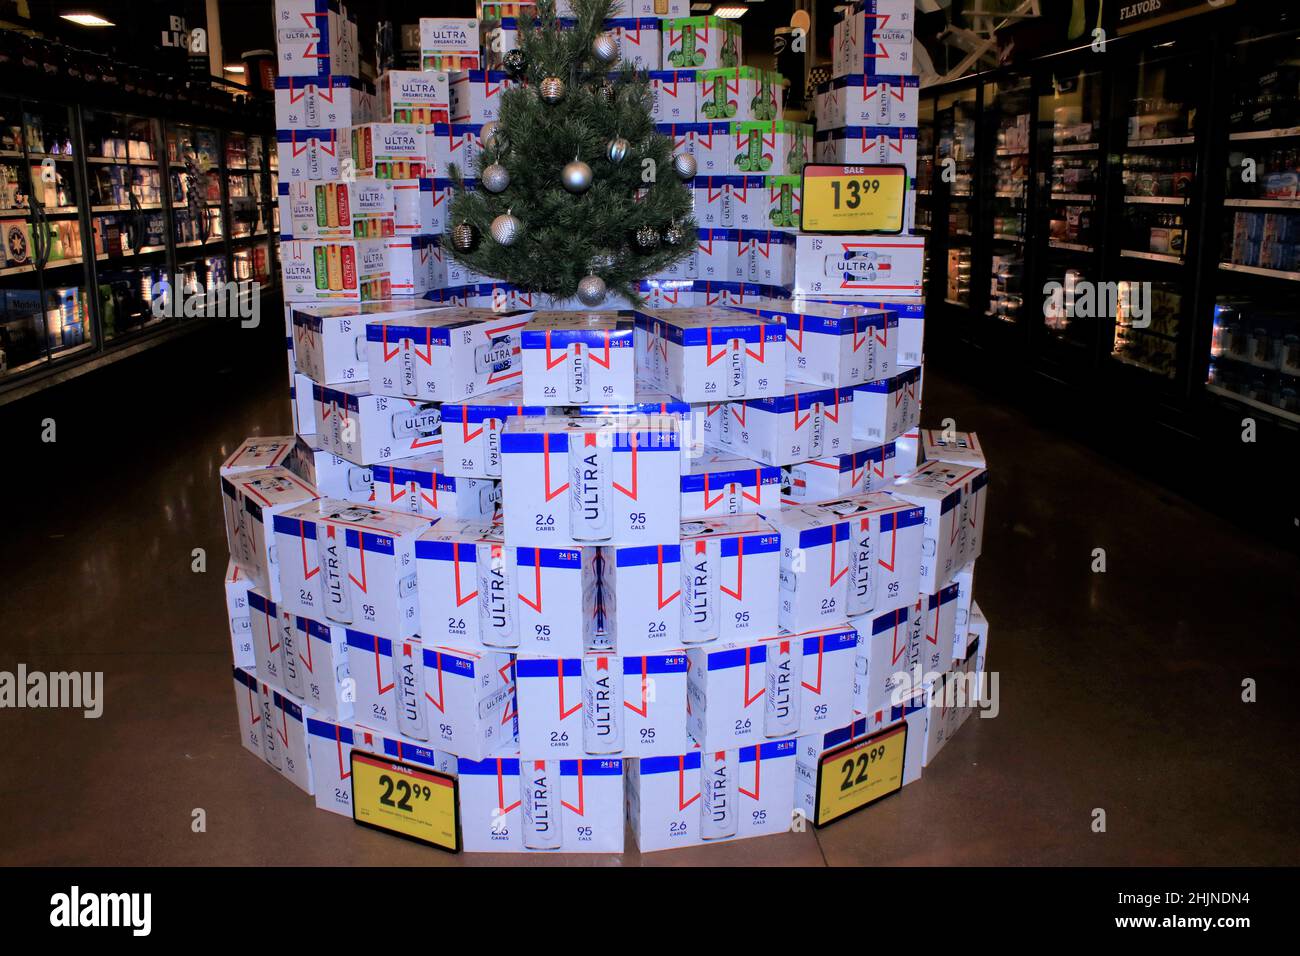 MICHELOB ULTRA boxes stacked in a Dillons store Stock Photo